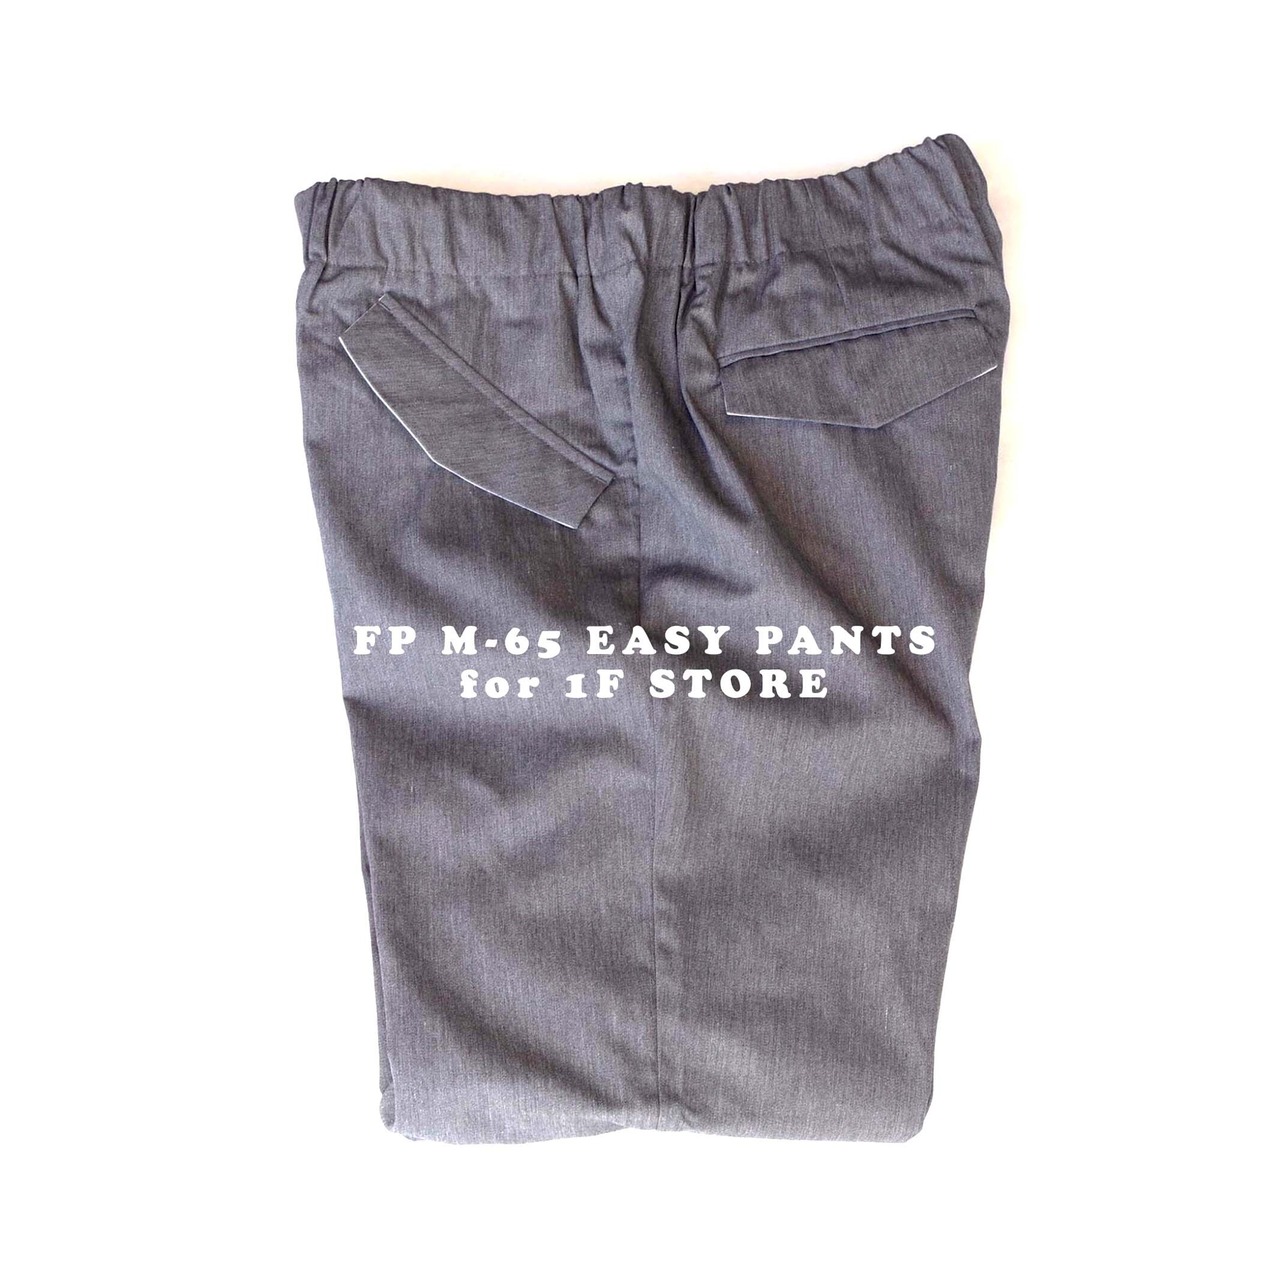 FP M-65 EASY PANTS for 1F STORE